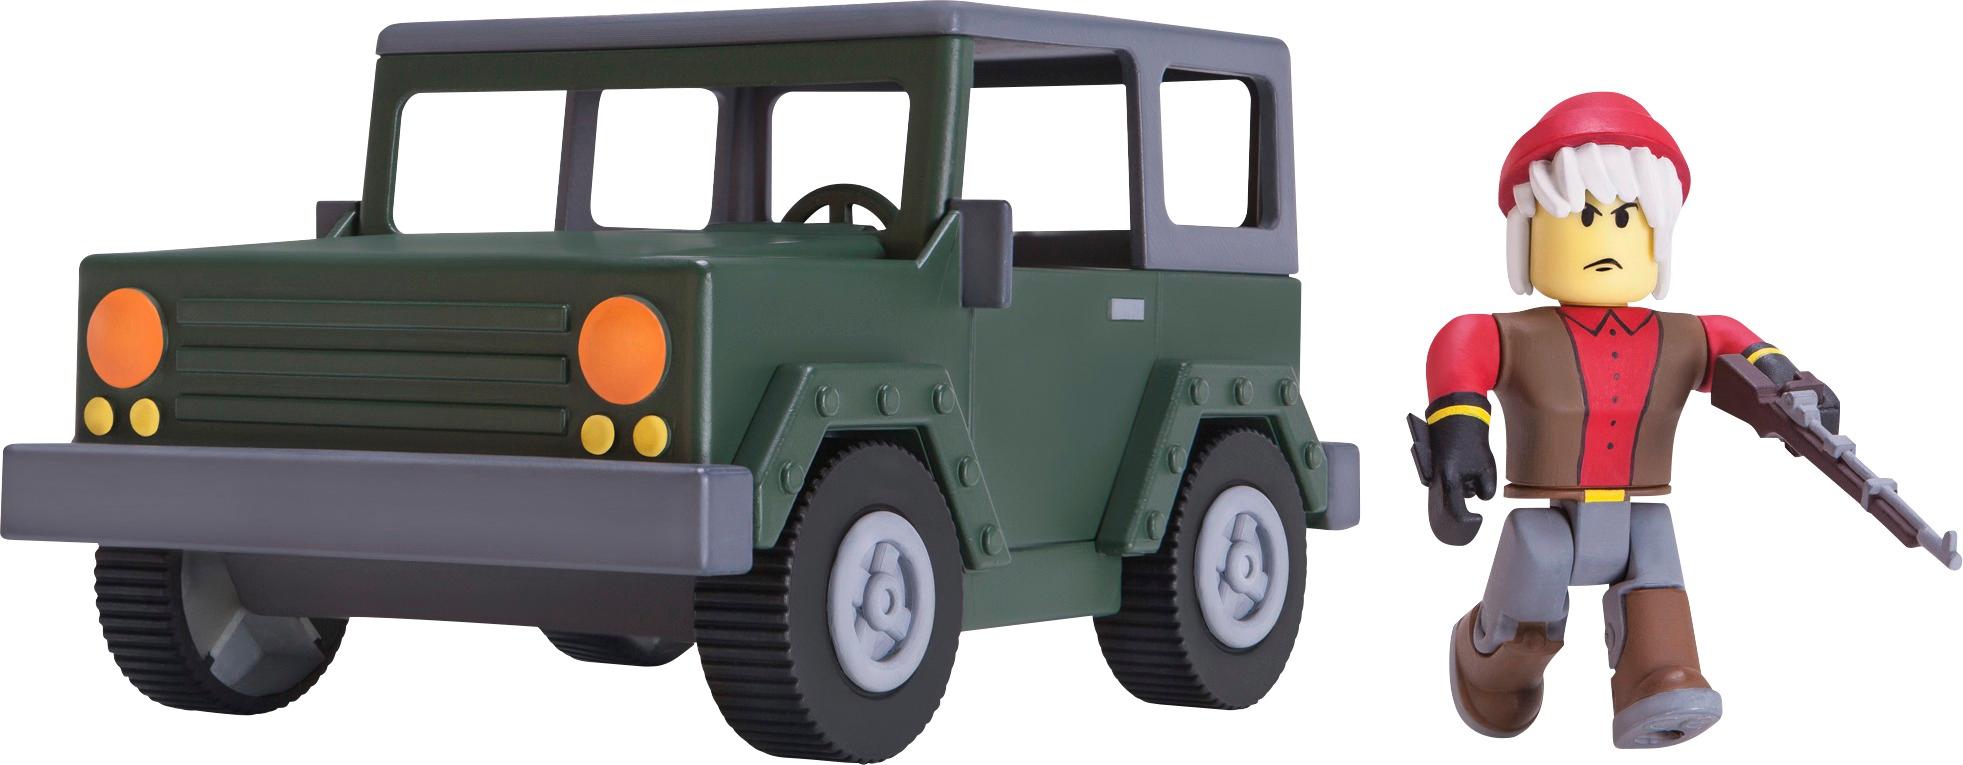 Best Buy Roblox Large Vehicle Styles May Vary 10770 - roblox toys swat vehicle roblox release date